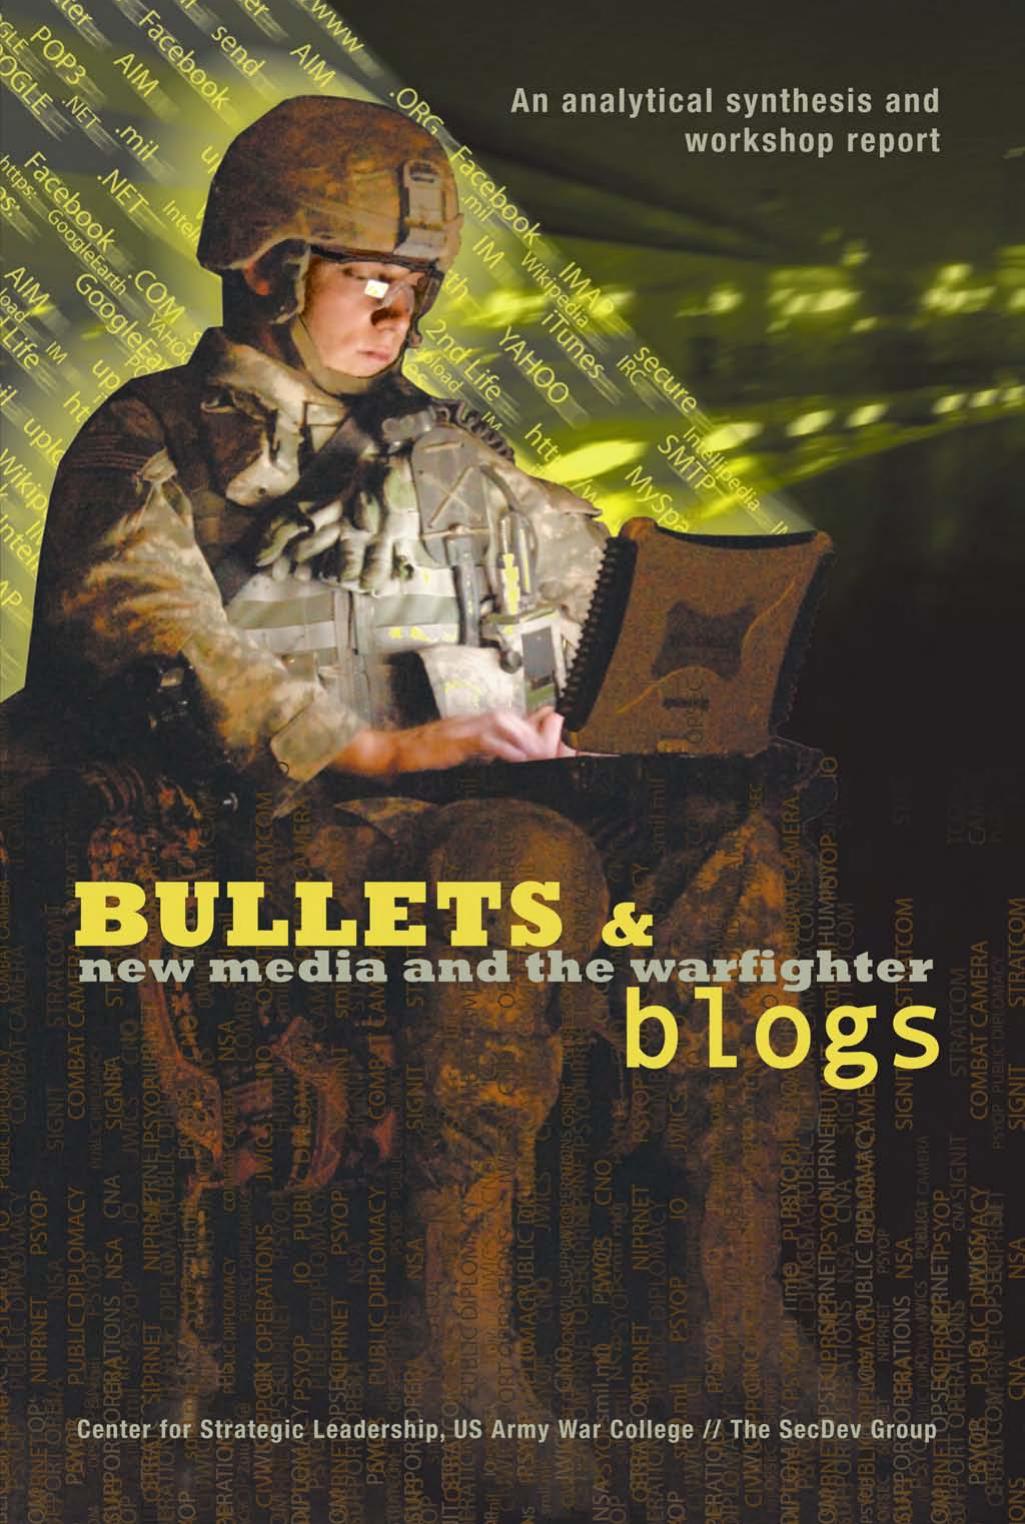 Bullets& Blogs: new media and the war fighter